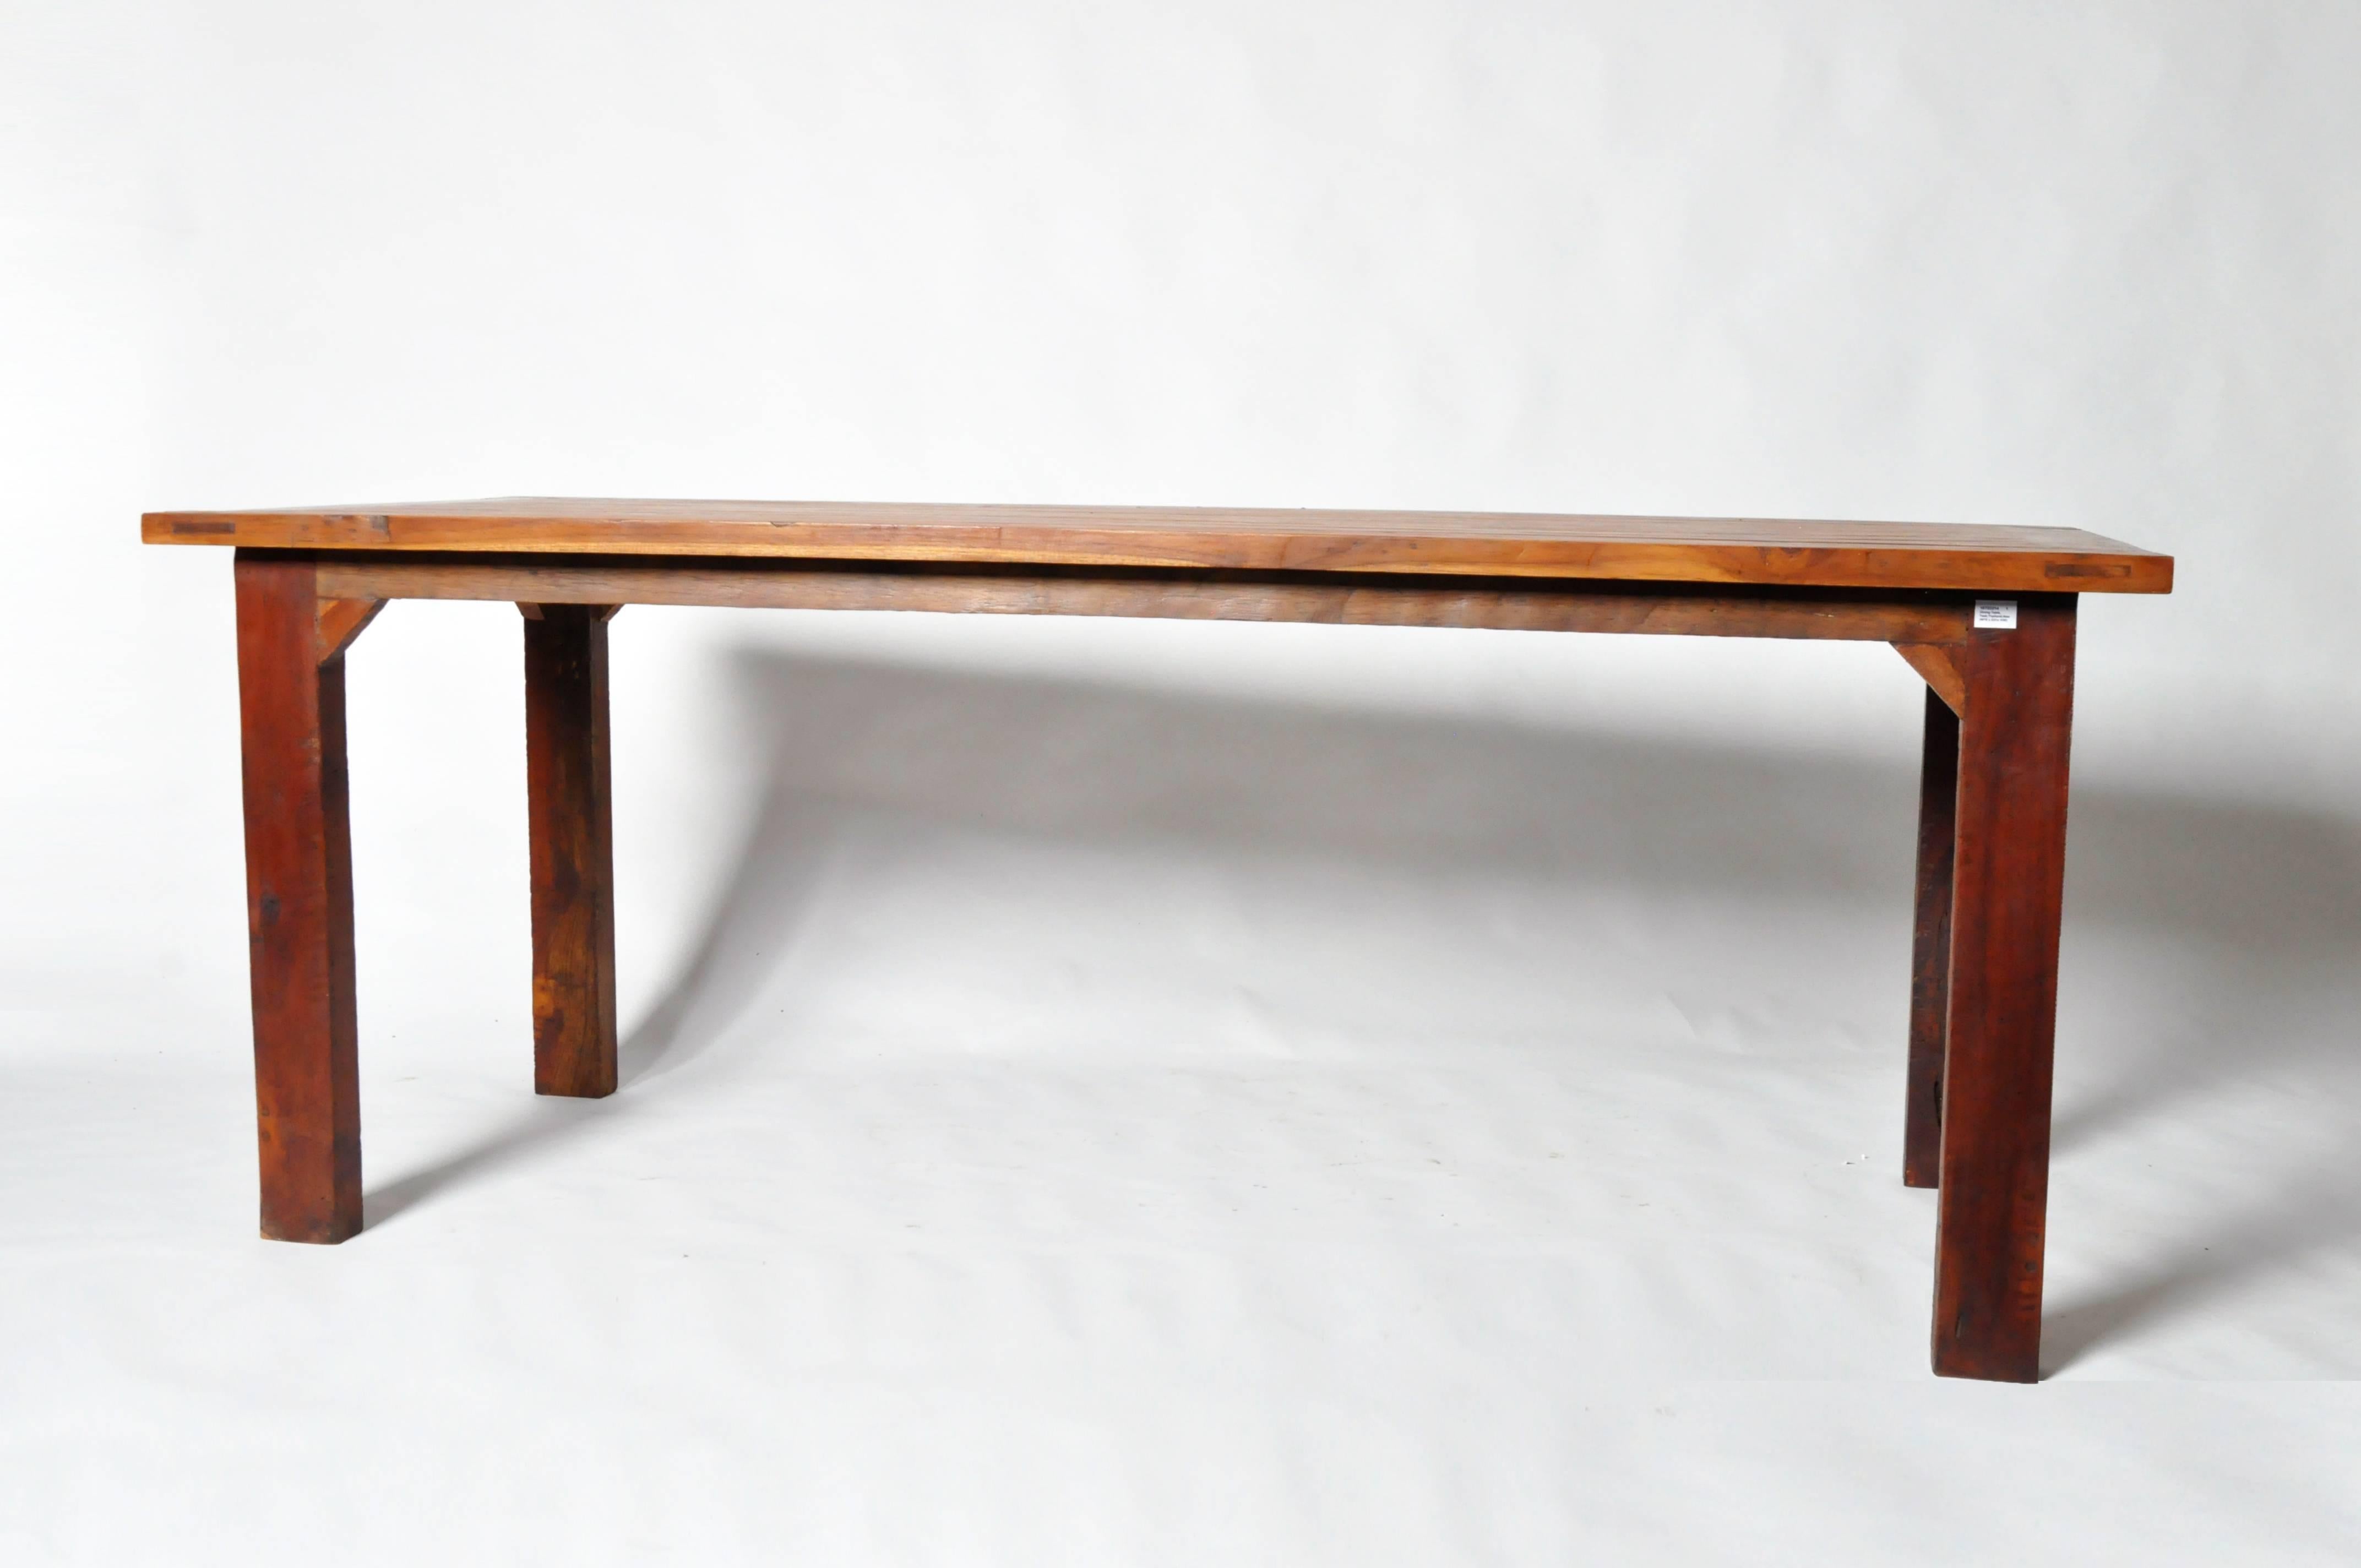 This table was made from reclaimed teakwood and is from Thailand. It can be used as a dining table or conference table.